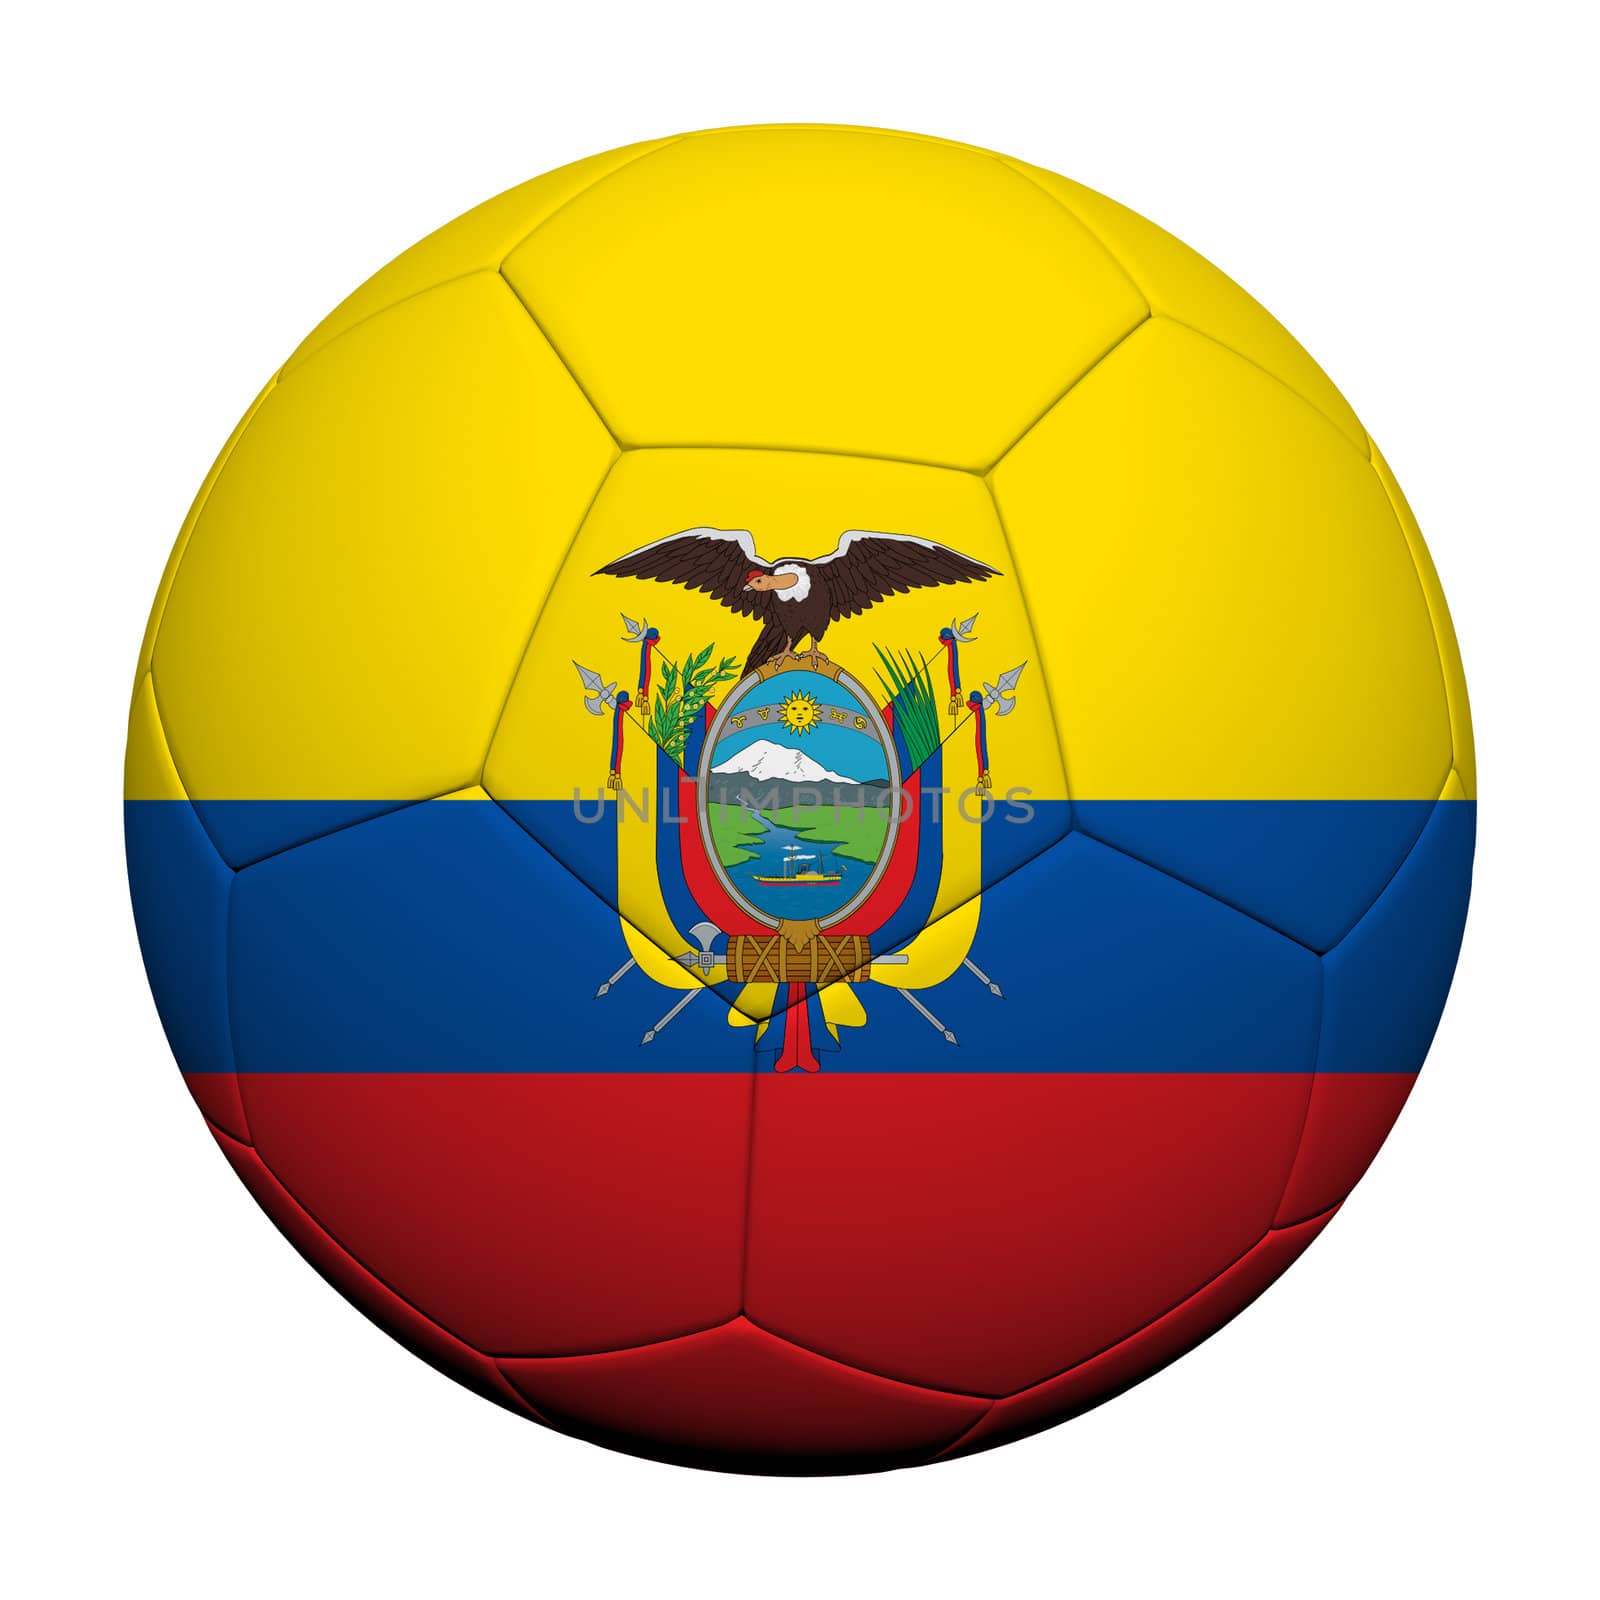 Ecuador Flag Pattern 3d rendering of a soccer ball  by jakgree